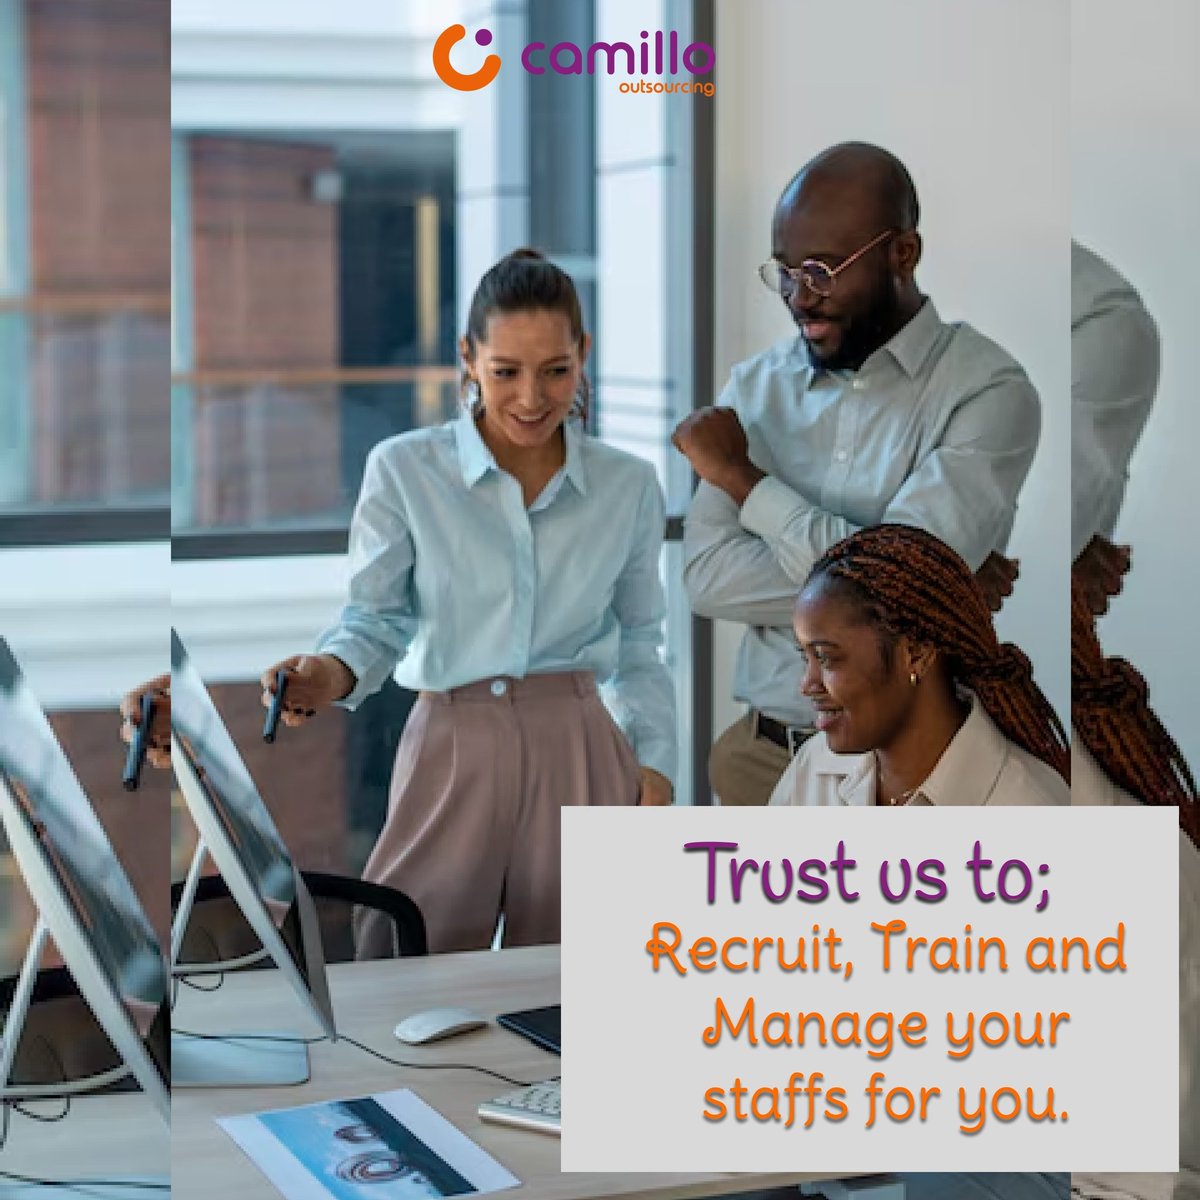 Camillo Outsourcing is ready to partner with you in your business success.
You can also trust us to recruit, train and manage your staffs for you.

info@camillo.ng
0201-343-8060
0201-343-8061

 #outsourcingpartner  #hr #humanresource #humanresourcesmanagement #staff #staffing